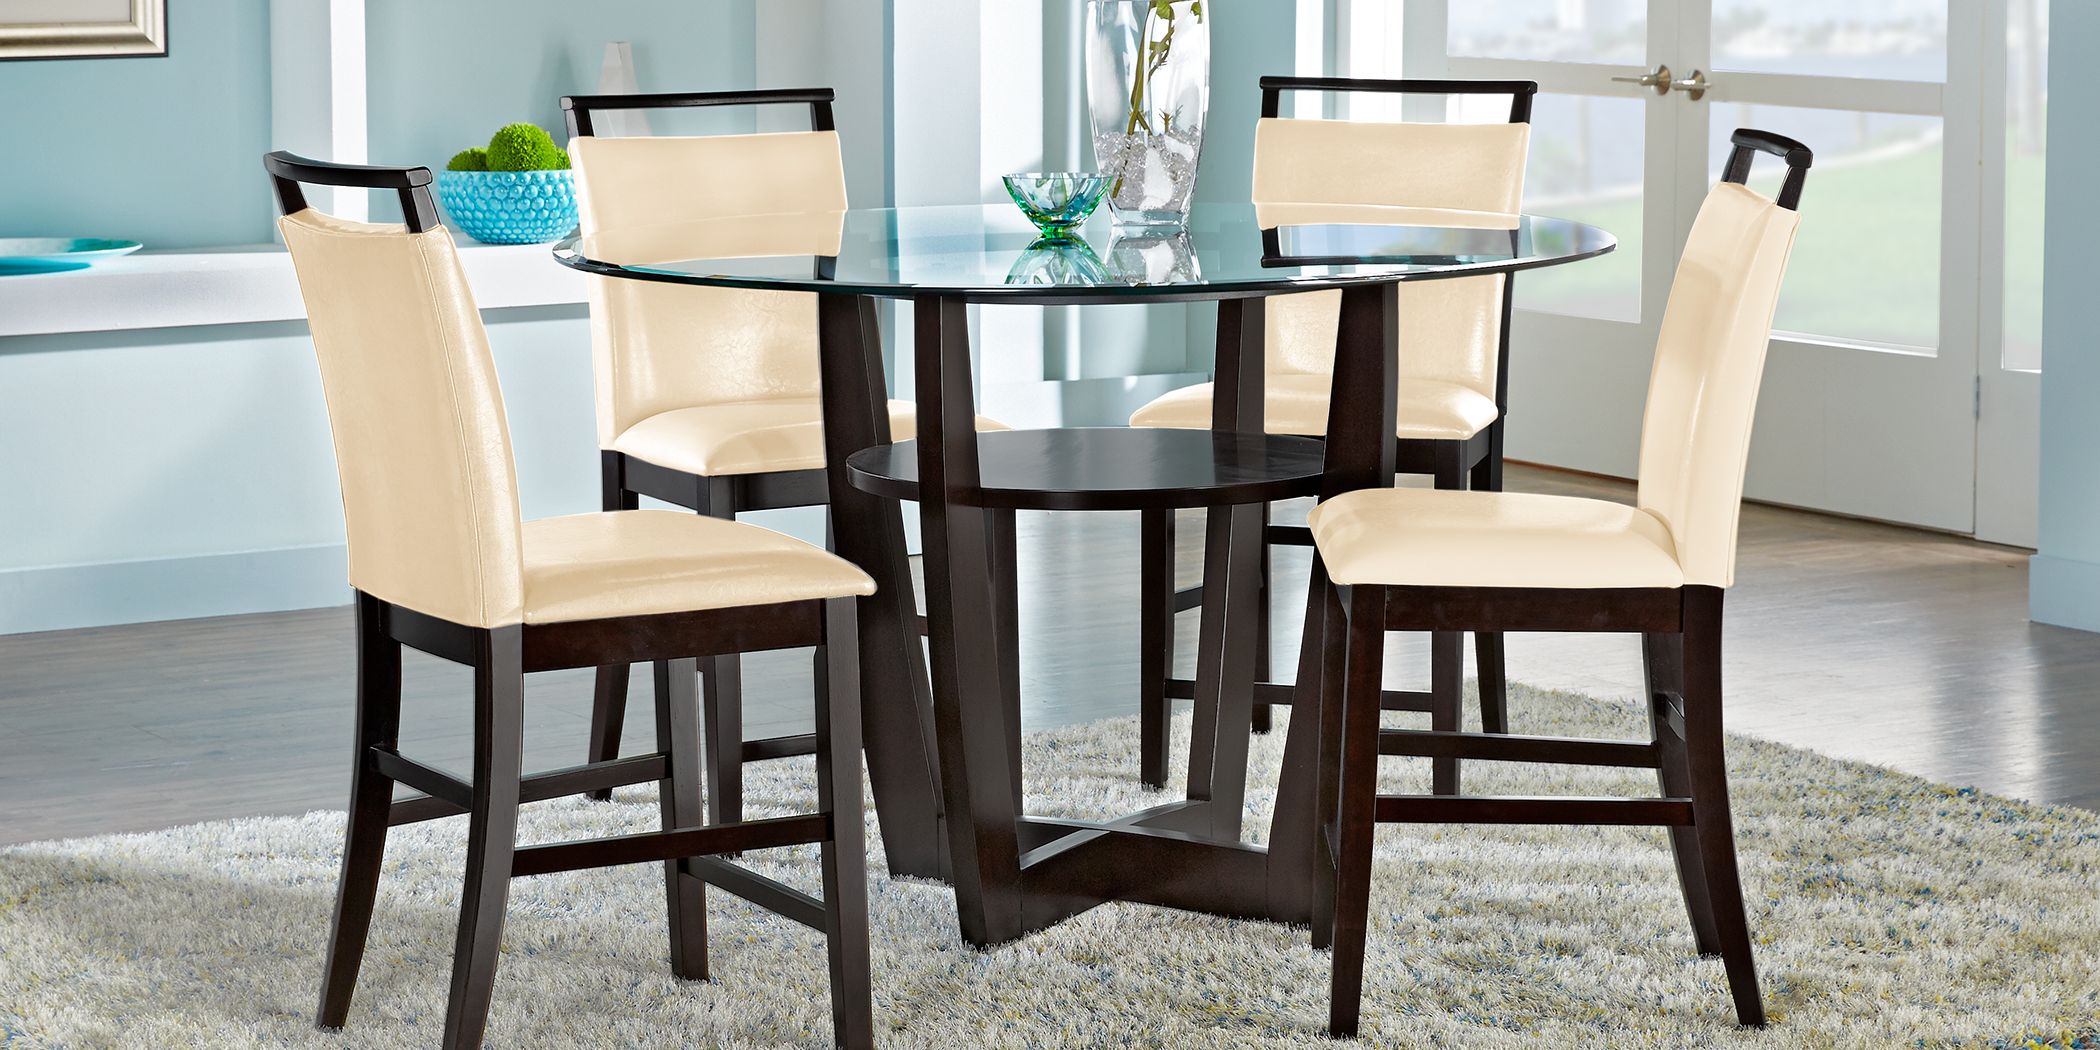 Glass Top Dining Room Table Sets For, Glass Dining Table With Chairs And Bench